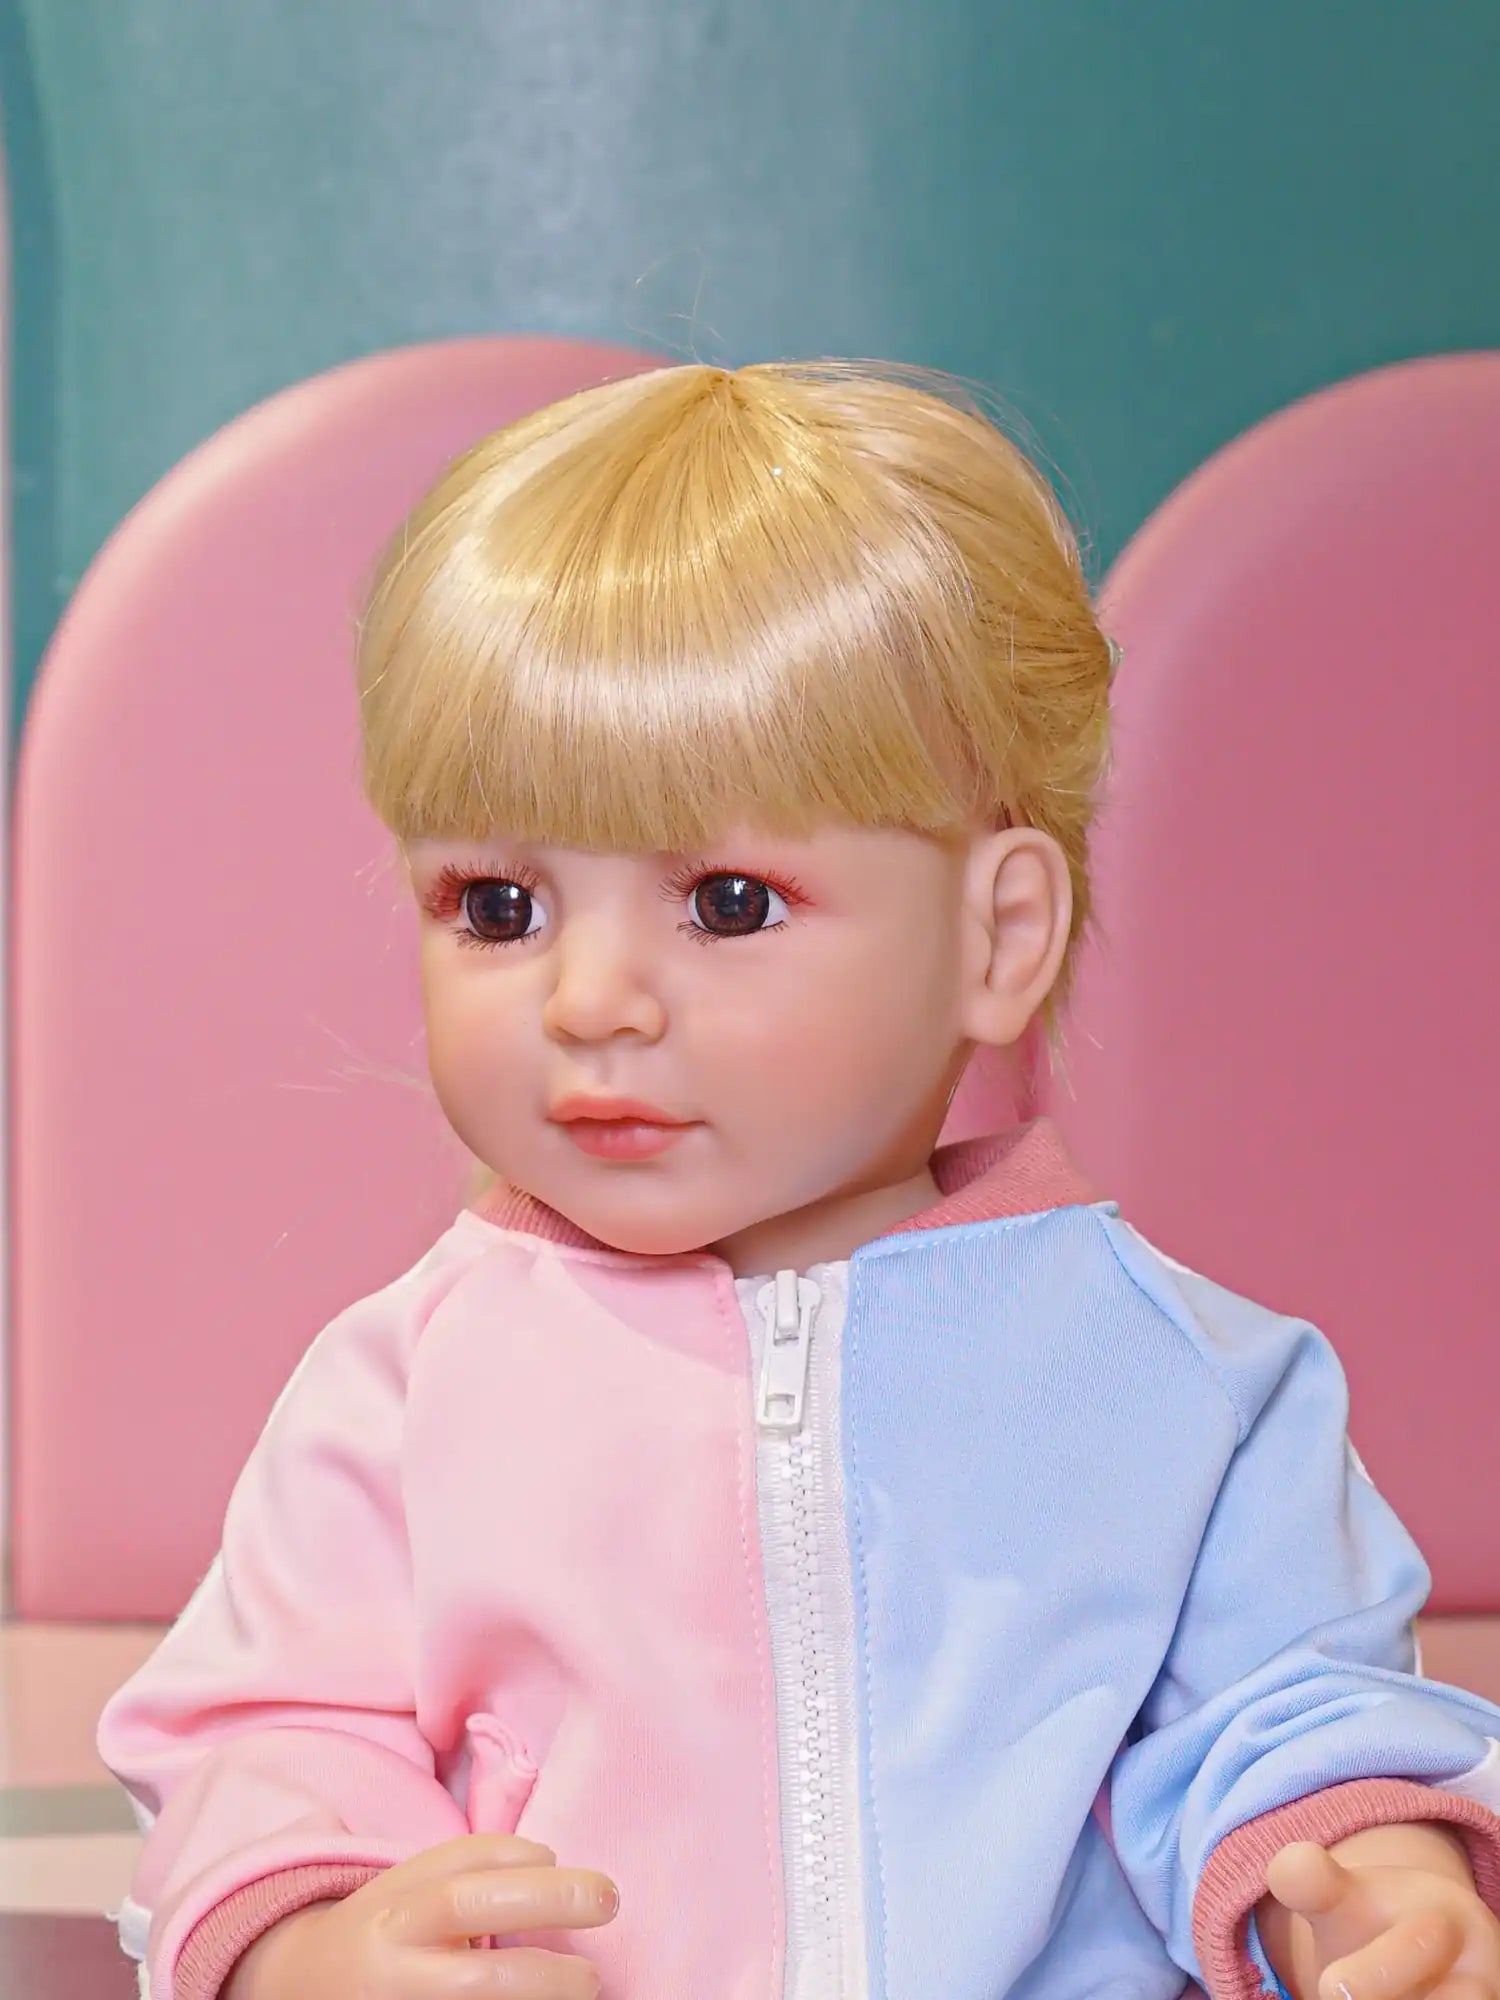 Blonde-haired doll with blue eyes, in casual pink and blue attire.